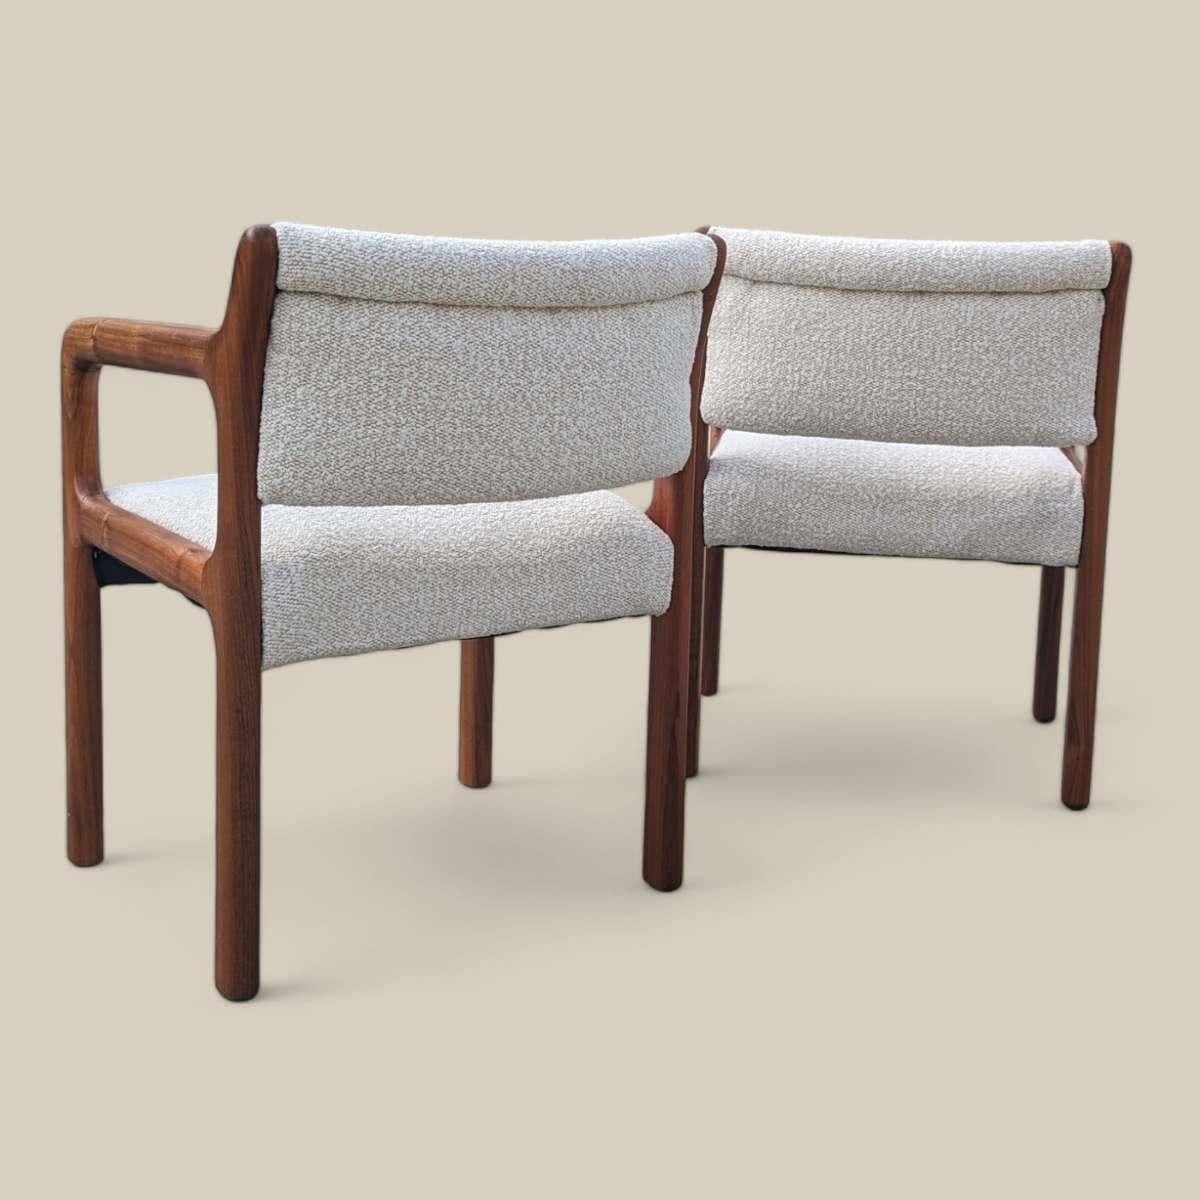 Pair of Mid Century Modern Solid Teak Armchairs with Boucle Upholstery For Sale 7